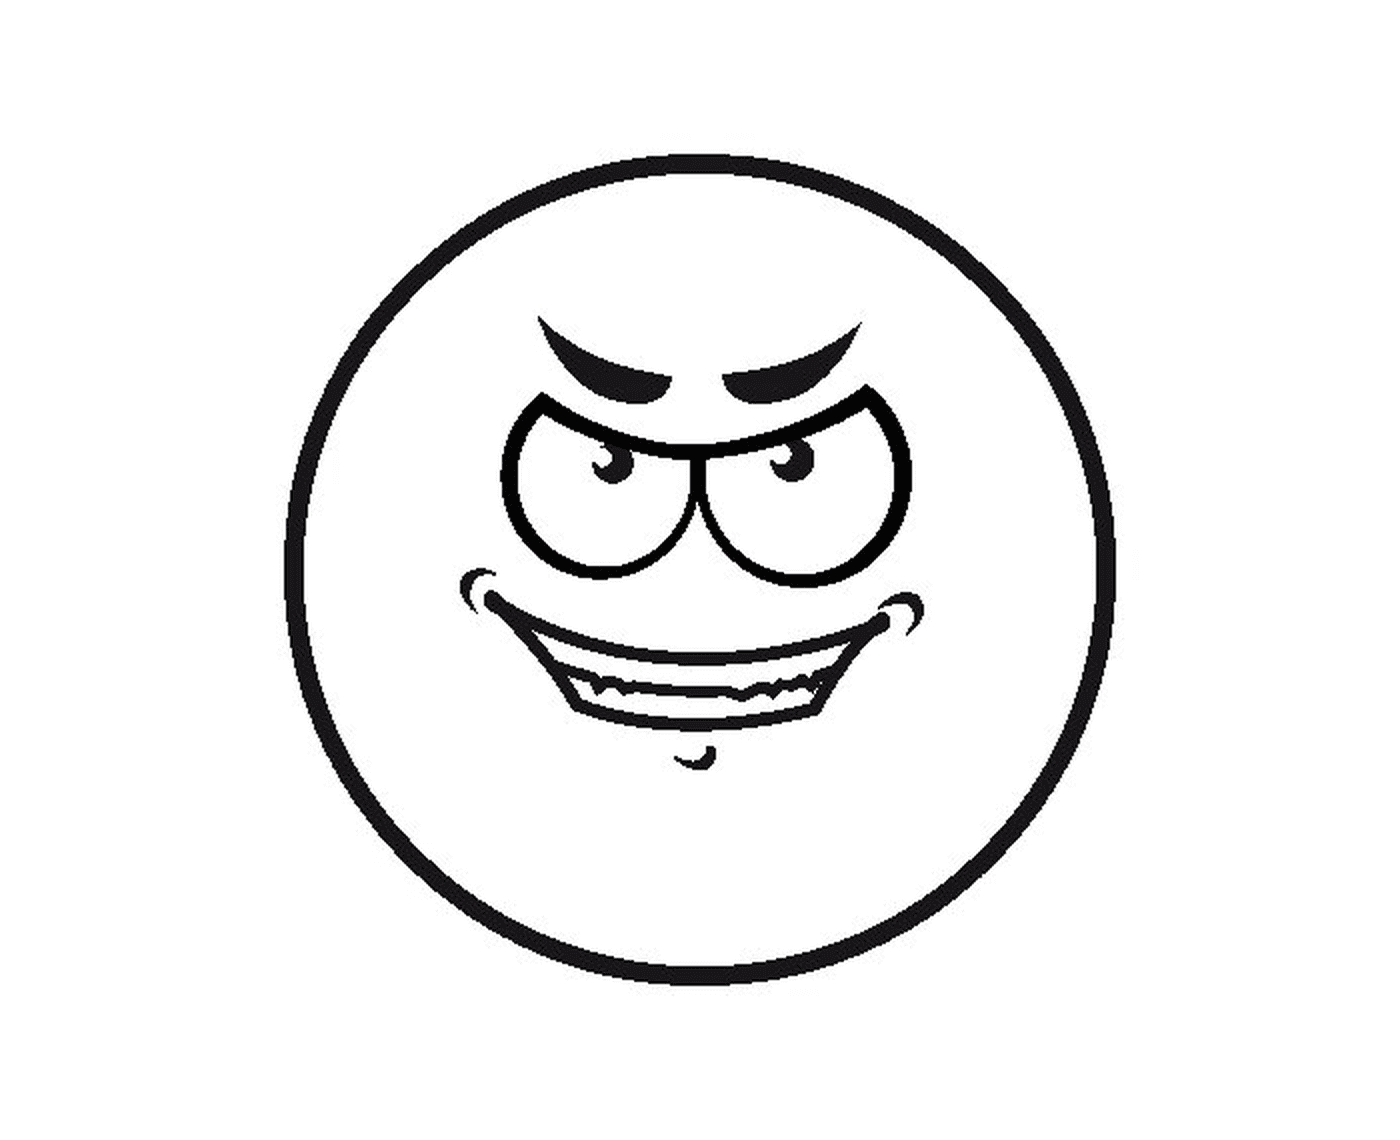  Evil face in circle 